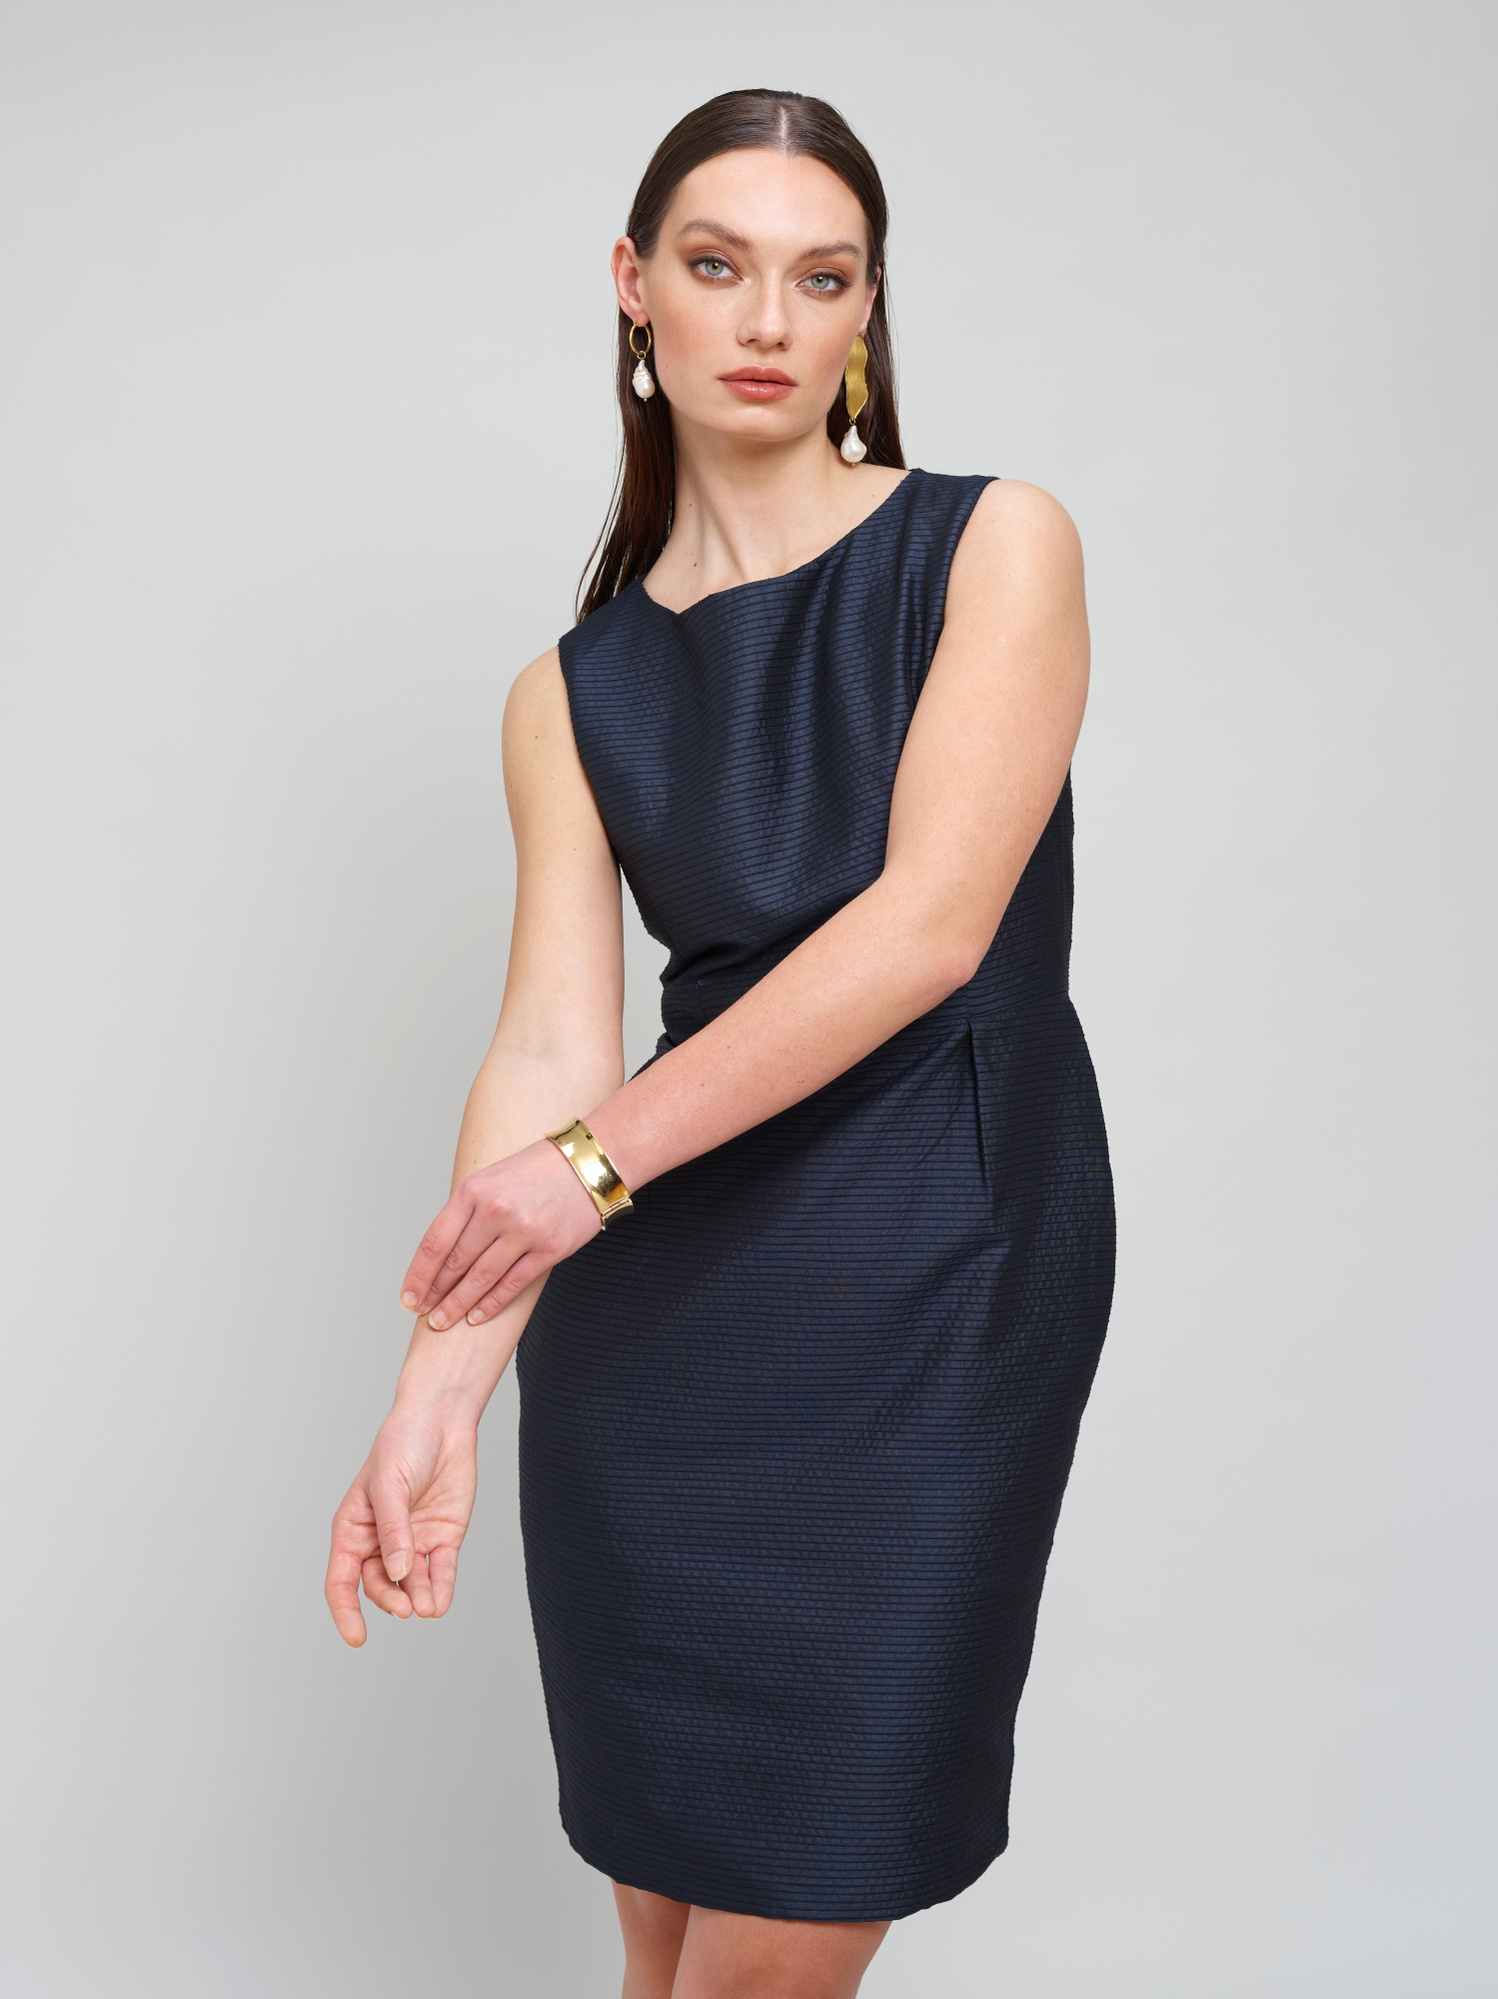 Model wears a navy dress for Amilli Clothing Studio Fashion shoot Spring/Summer 2023 collection in a professional commercial photography studio in Dublin